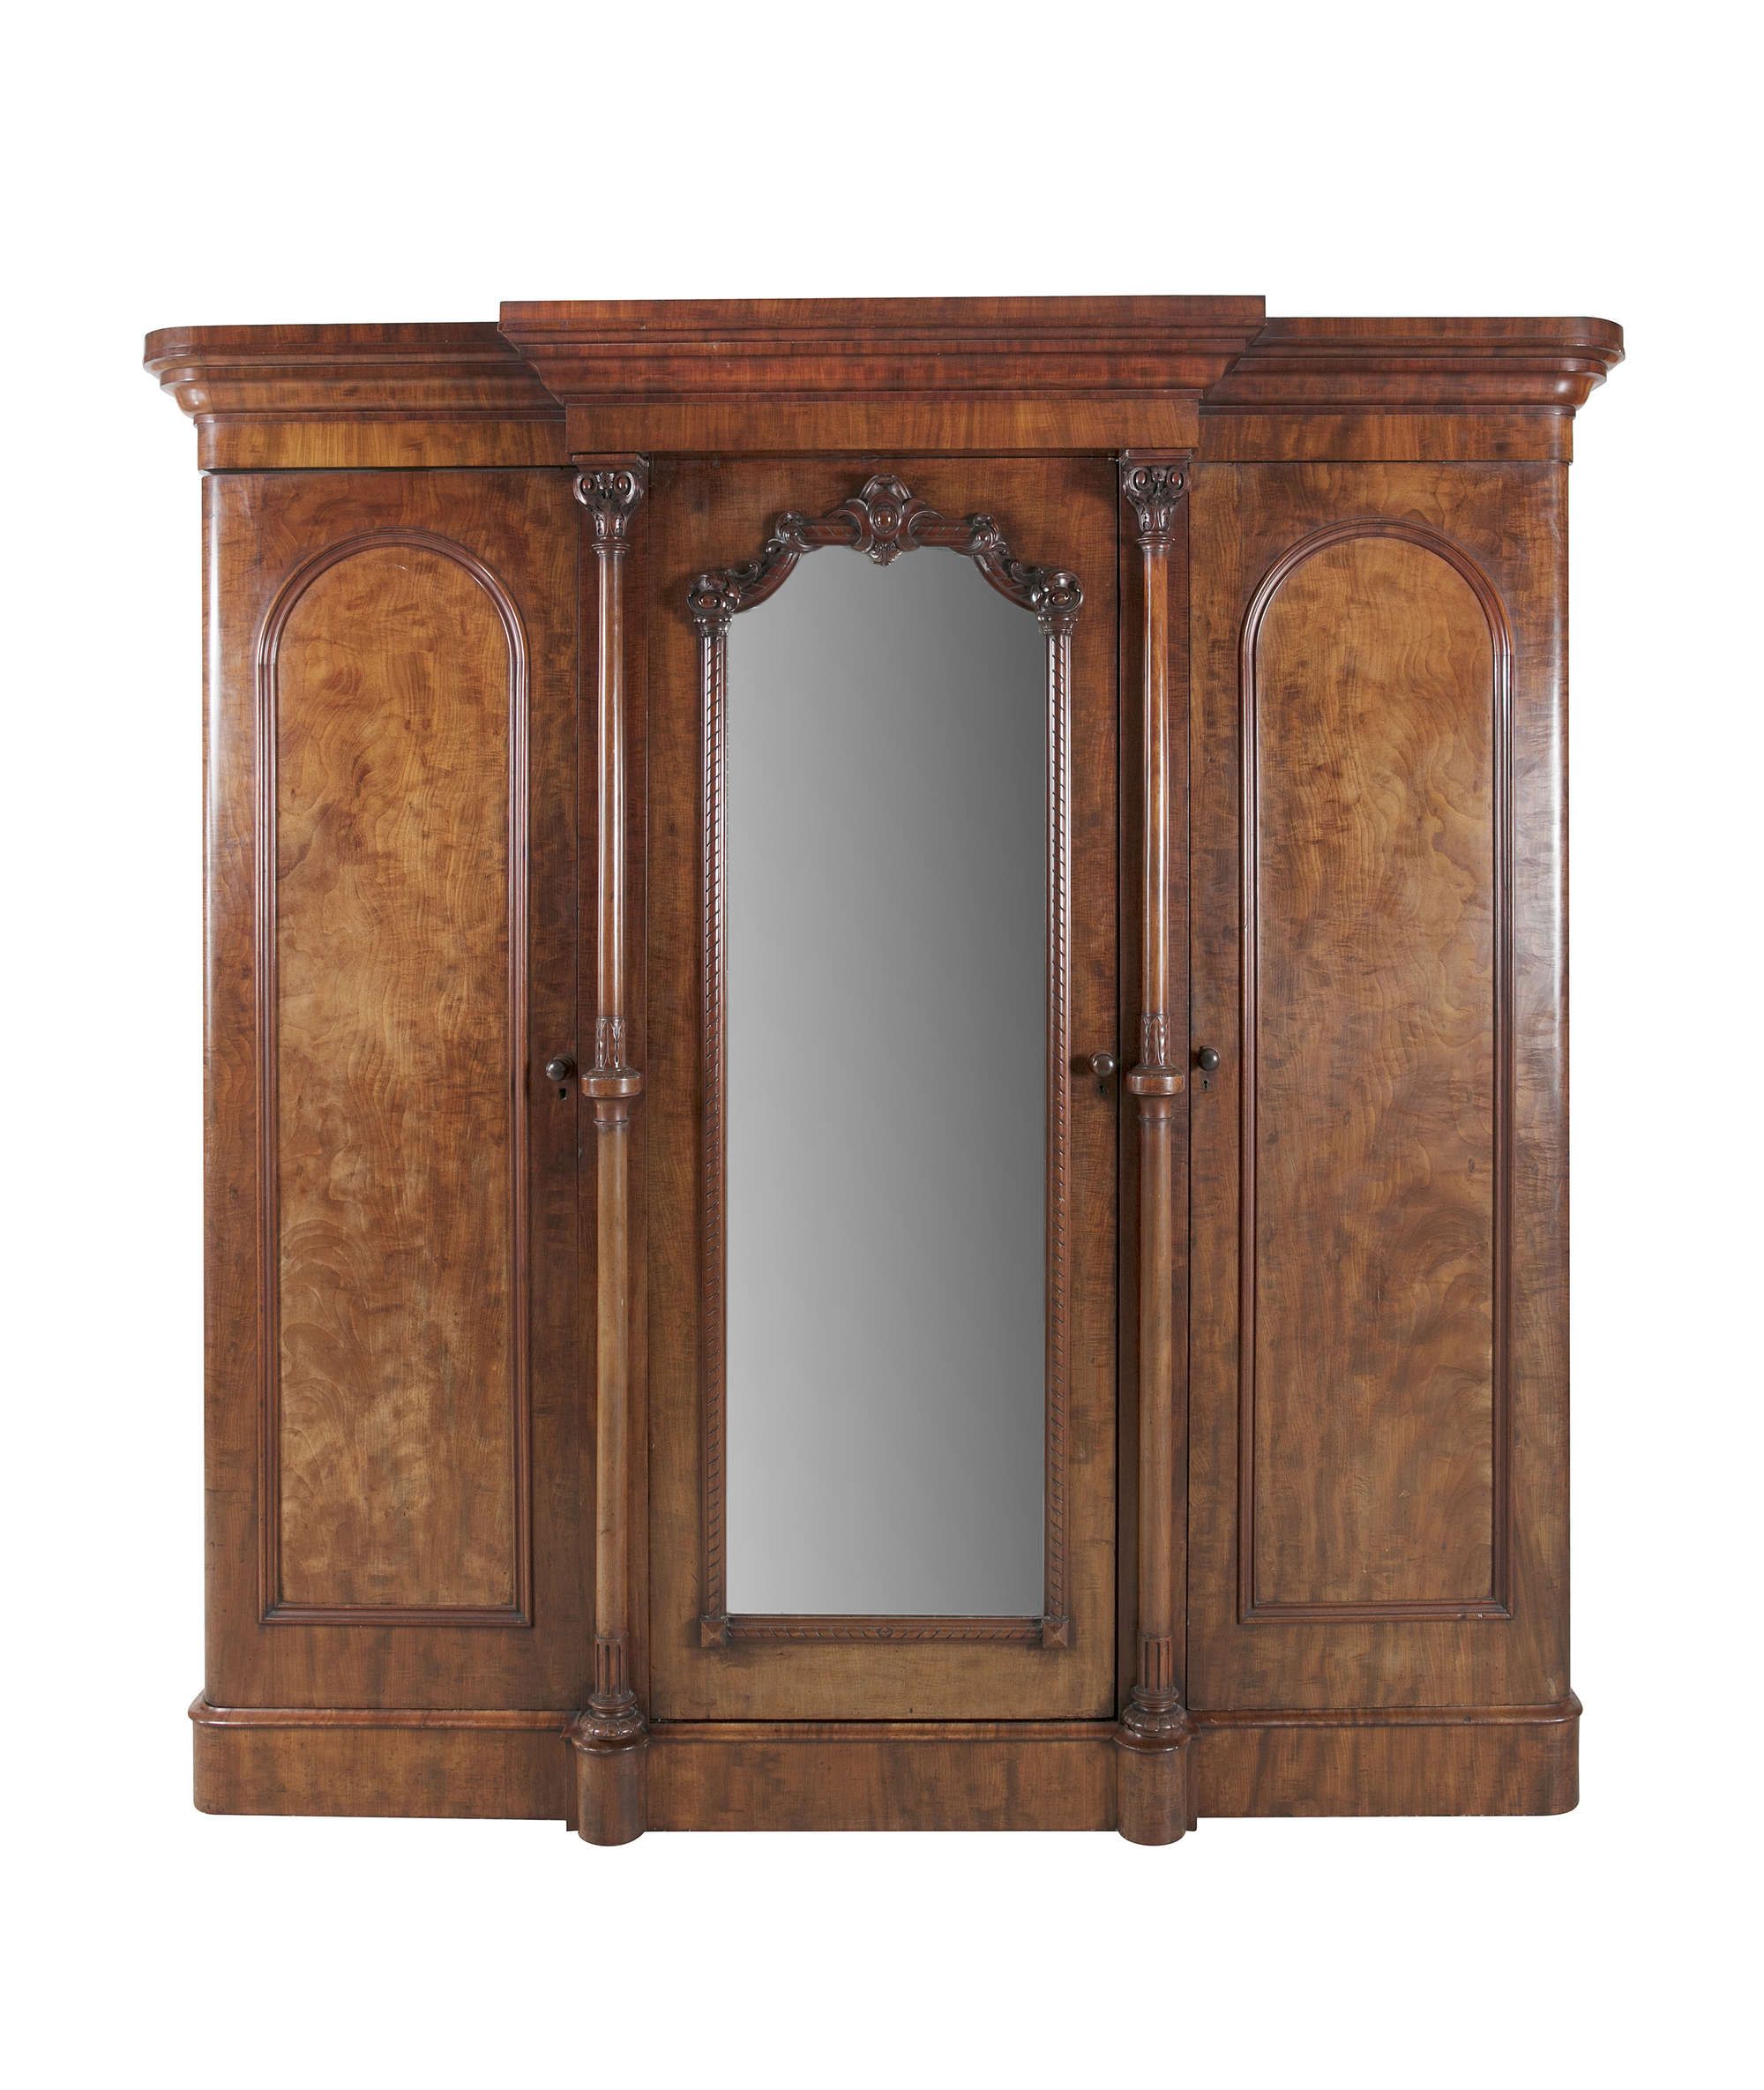 Lot:674 | A Victorian Mahogany Breakfront Wardrobe,j.j. Byrne Of  Dublin, With Bold Moulded Cornice Above A Central Mirror, Front Door,  Flankedslender Pillar And Twin Arch Top Panel Doors, Pertaining To Victorian Breakfront Wardrobes (Gallery 19 of 20)